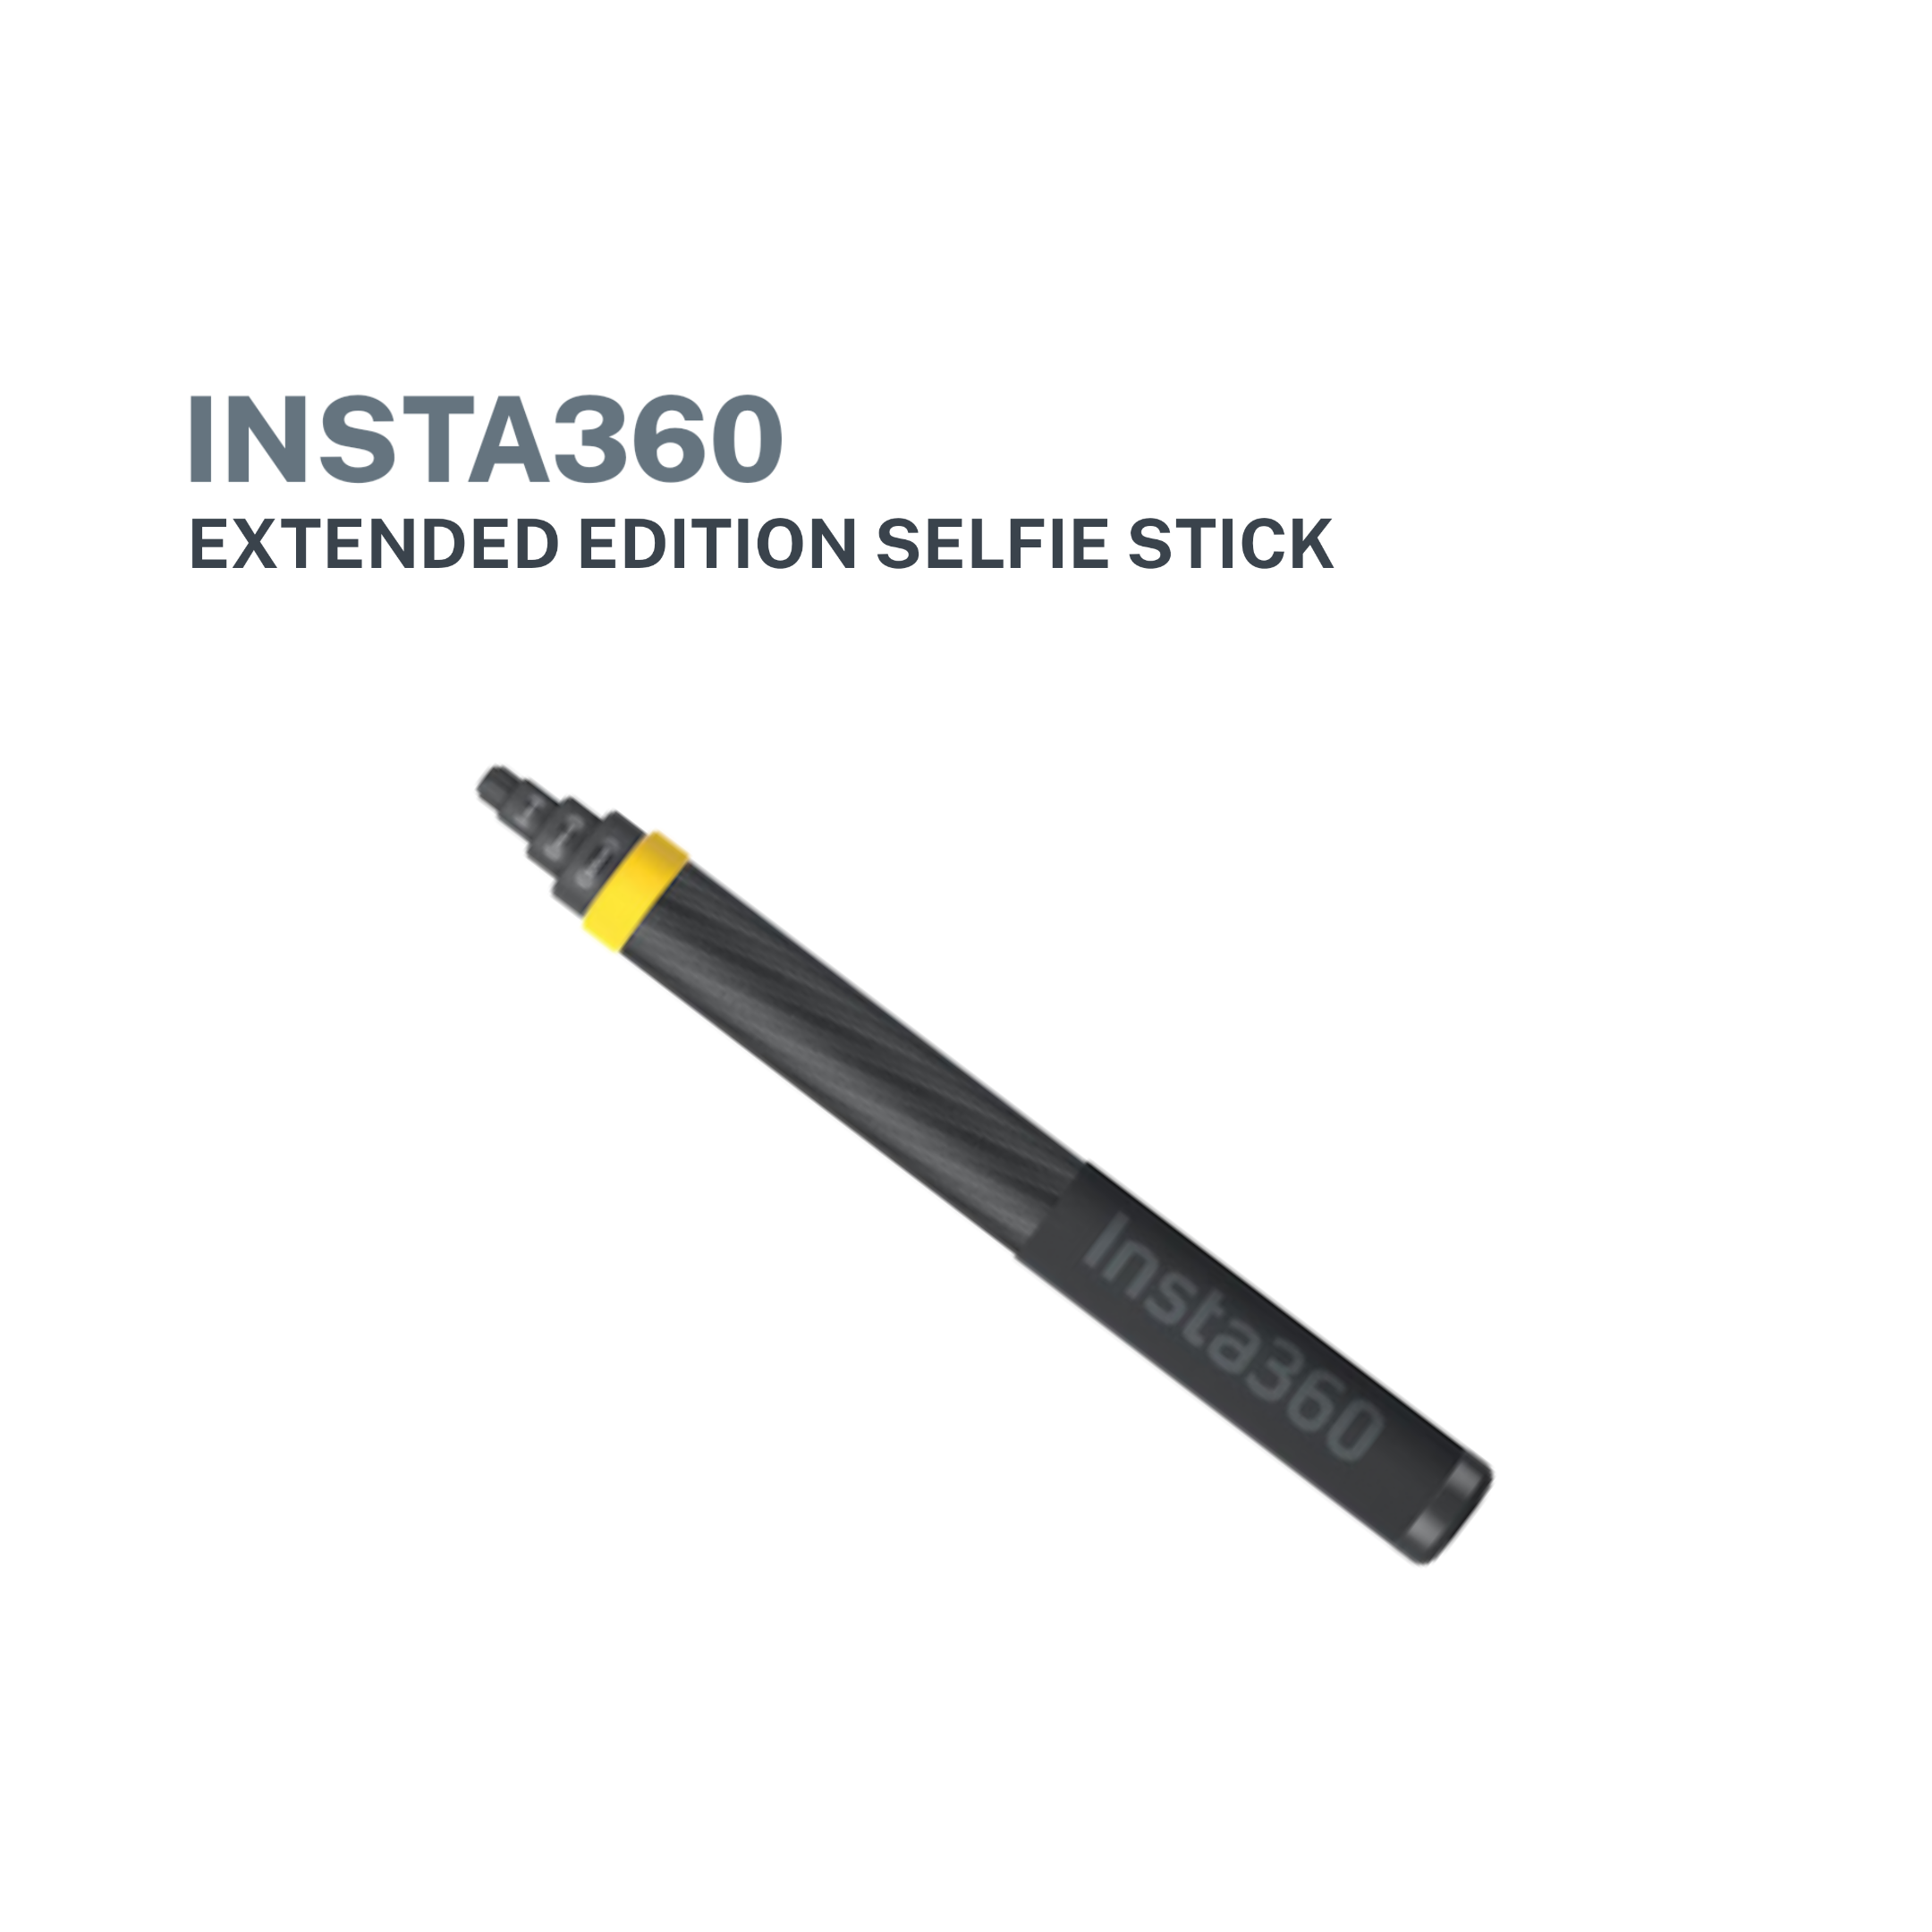 Extended Edition Selfie Stick